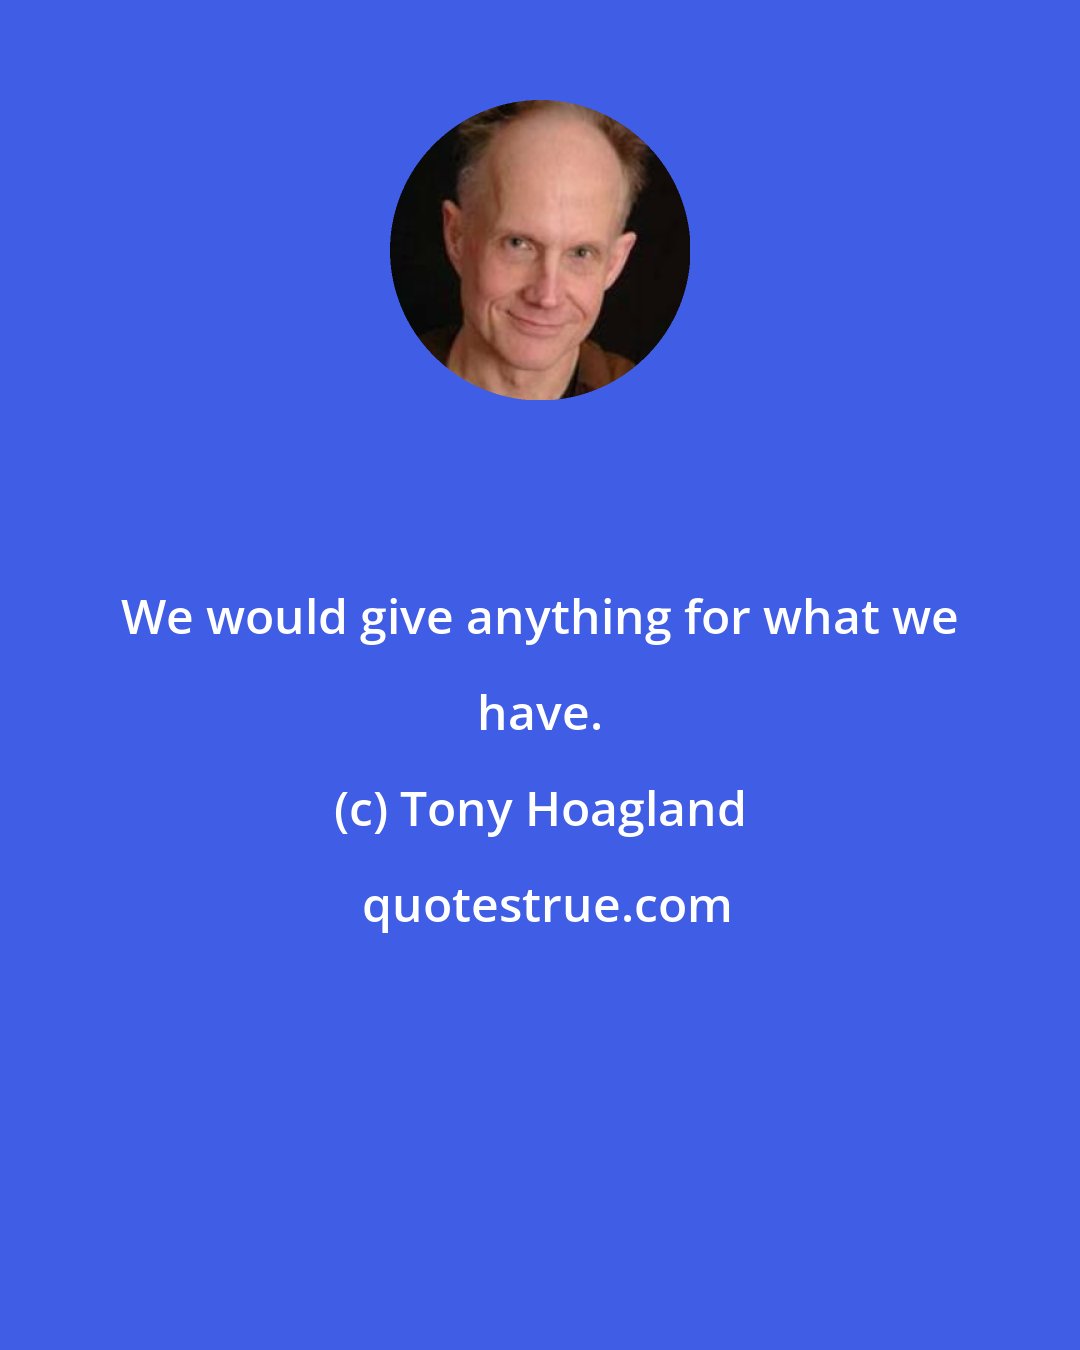 Tony Hoagland: We would give anything for what we have.